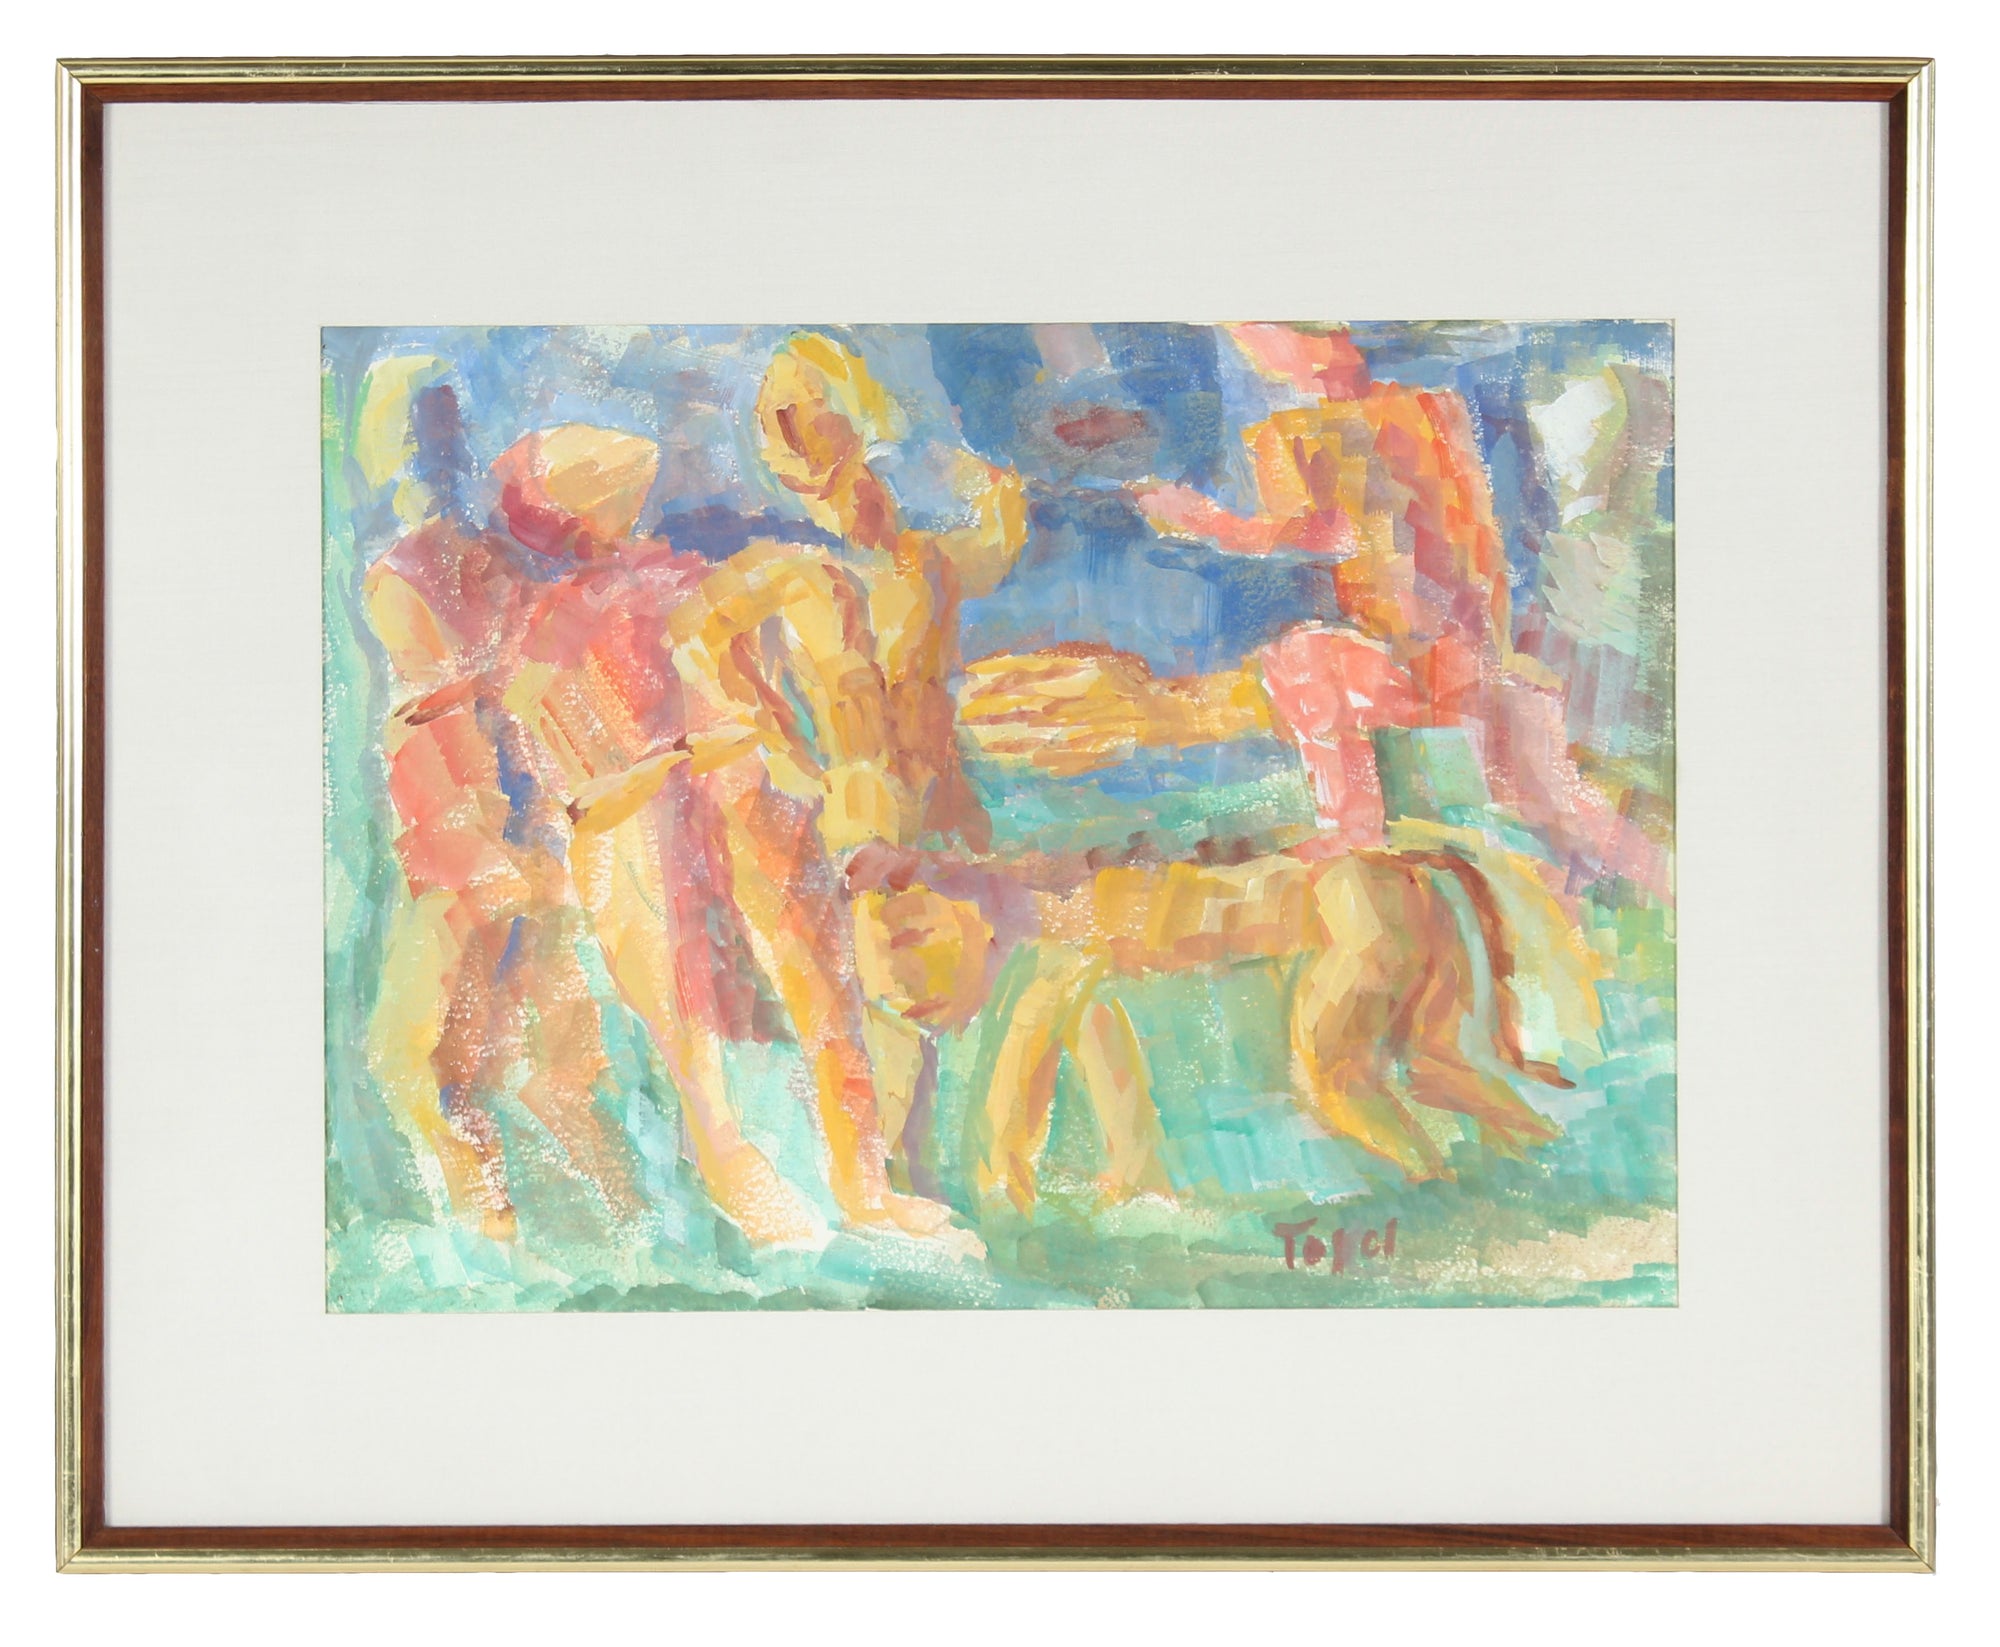 Colorful Expressionist Dancing Figures with Lion <br>Early-Mid 20th Century Watercolor <br><br>#13230